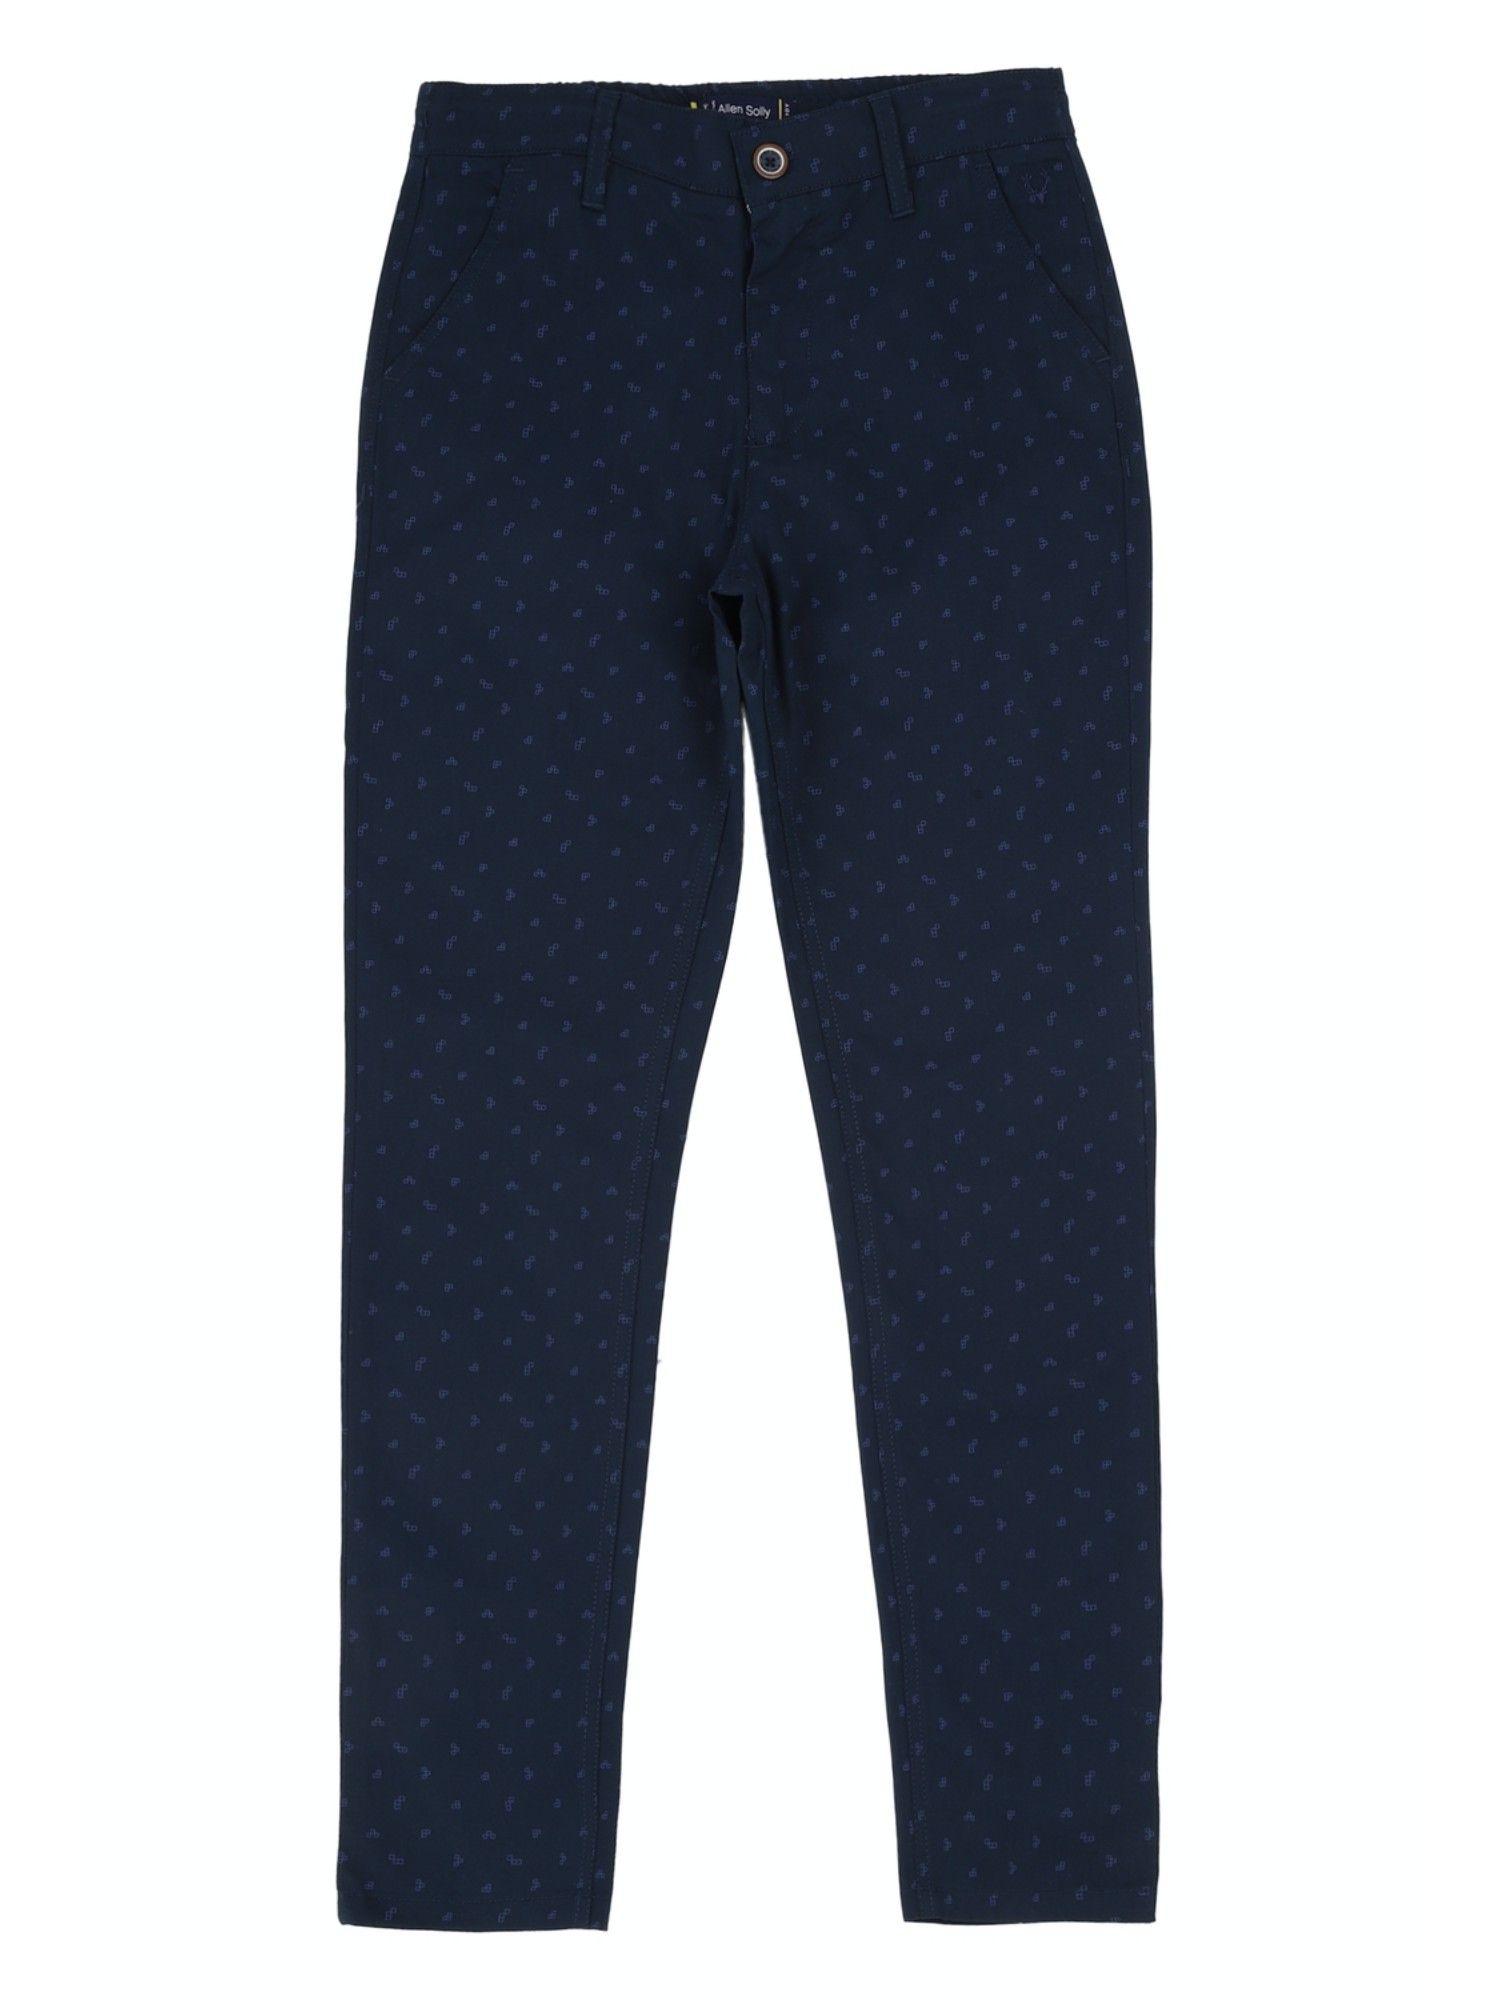 Boys Navy Printed Trousers